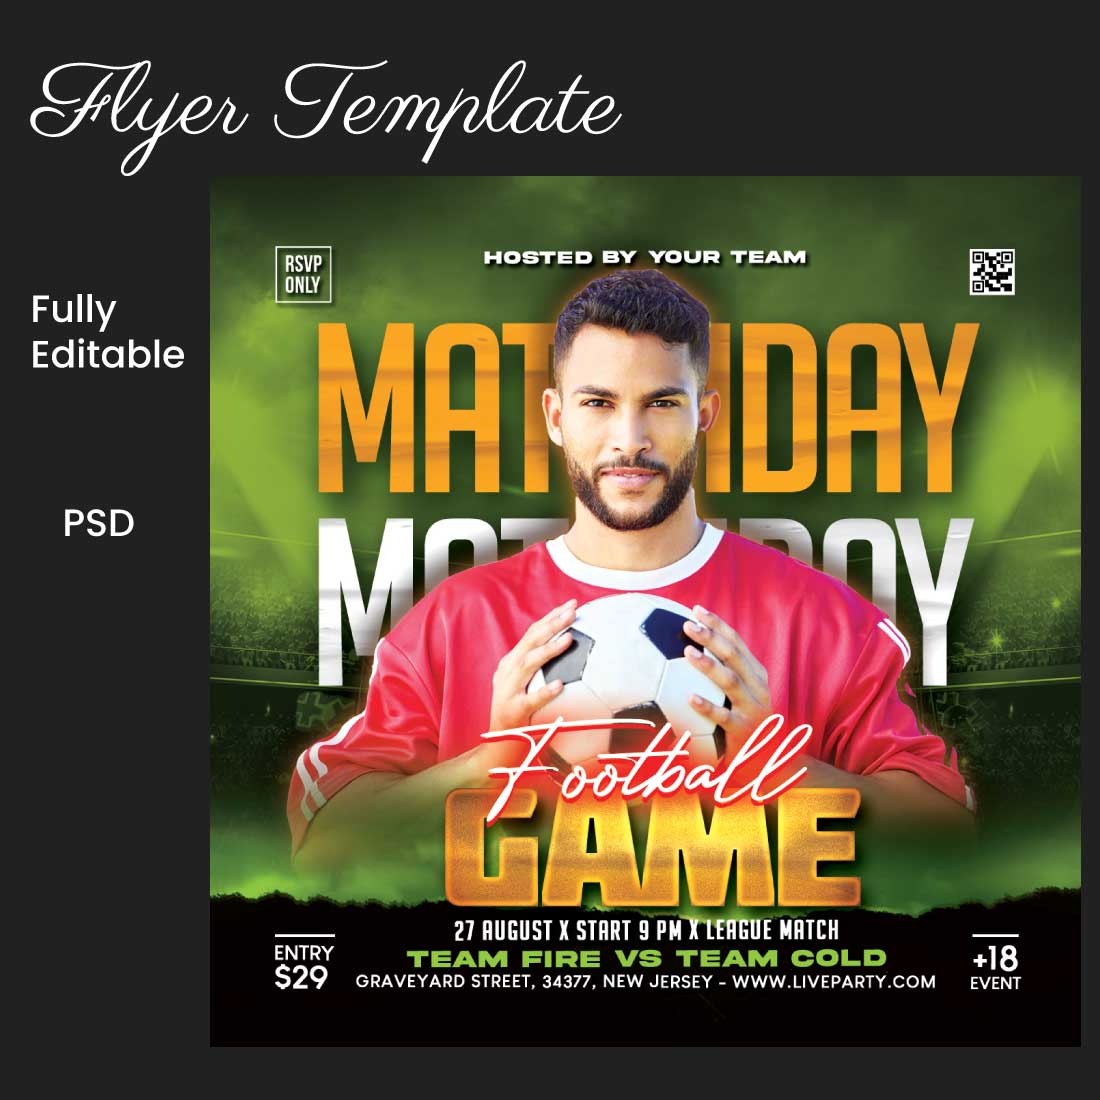 Football Flyer Template cover image.